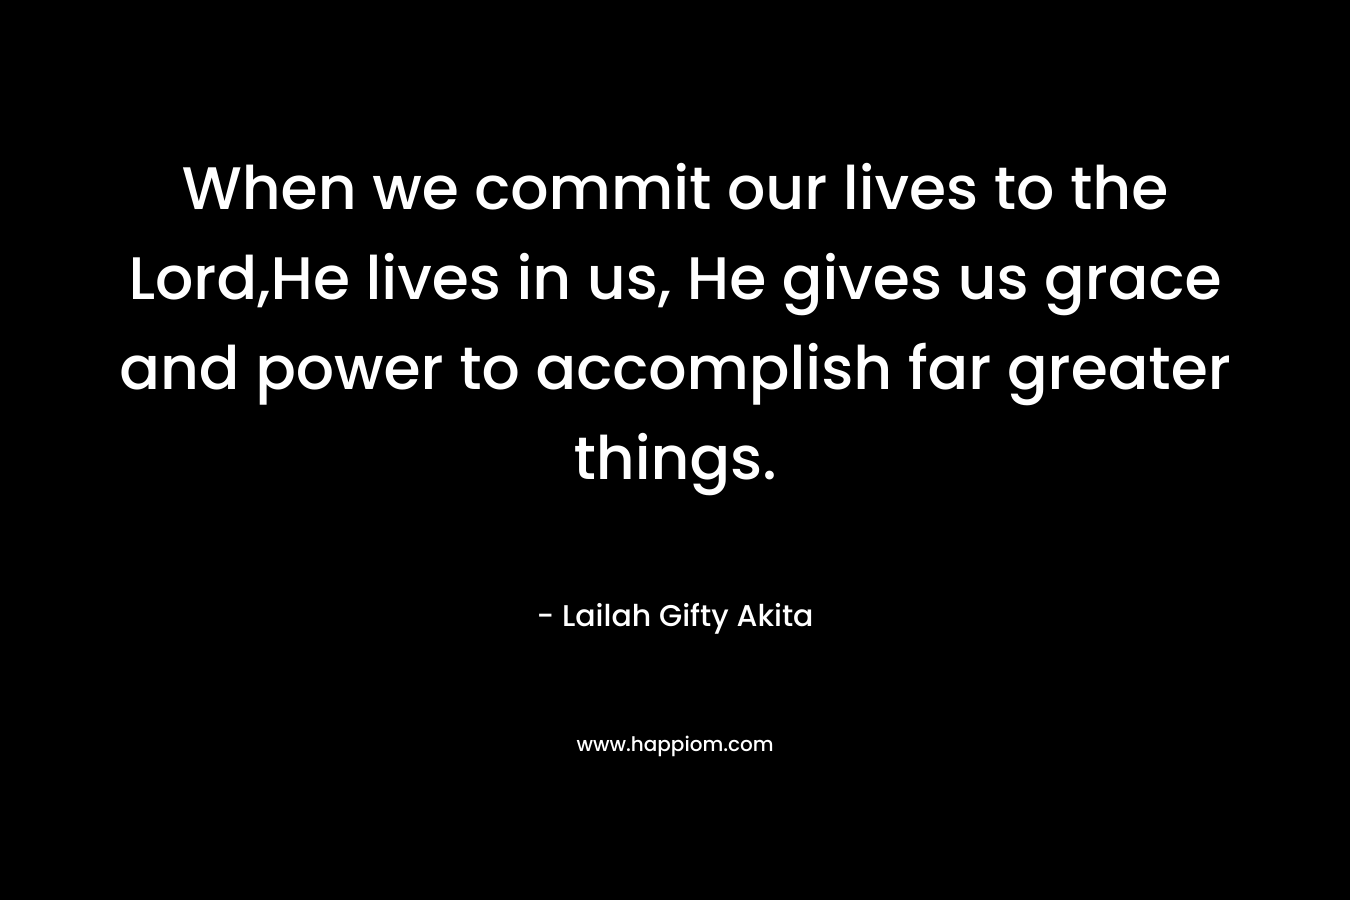 When we commit our lives to the Lord,He lives in us, He gives us grace and power to accomplish far greater things.